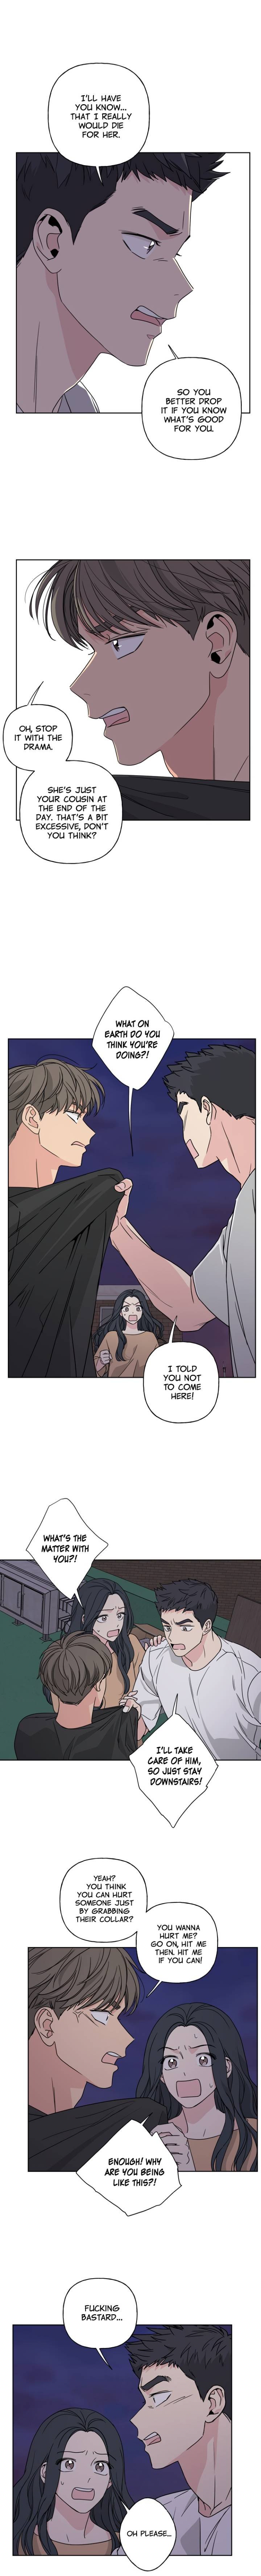 mother-im-sorry-chap-27-10